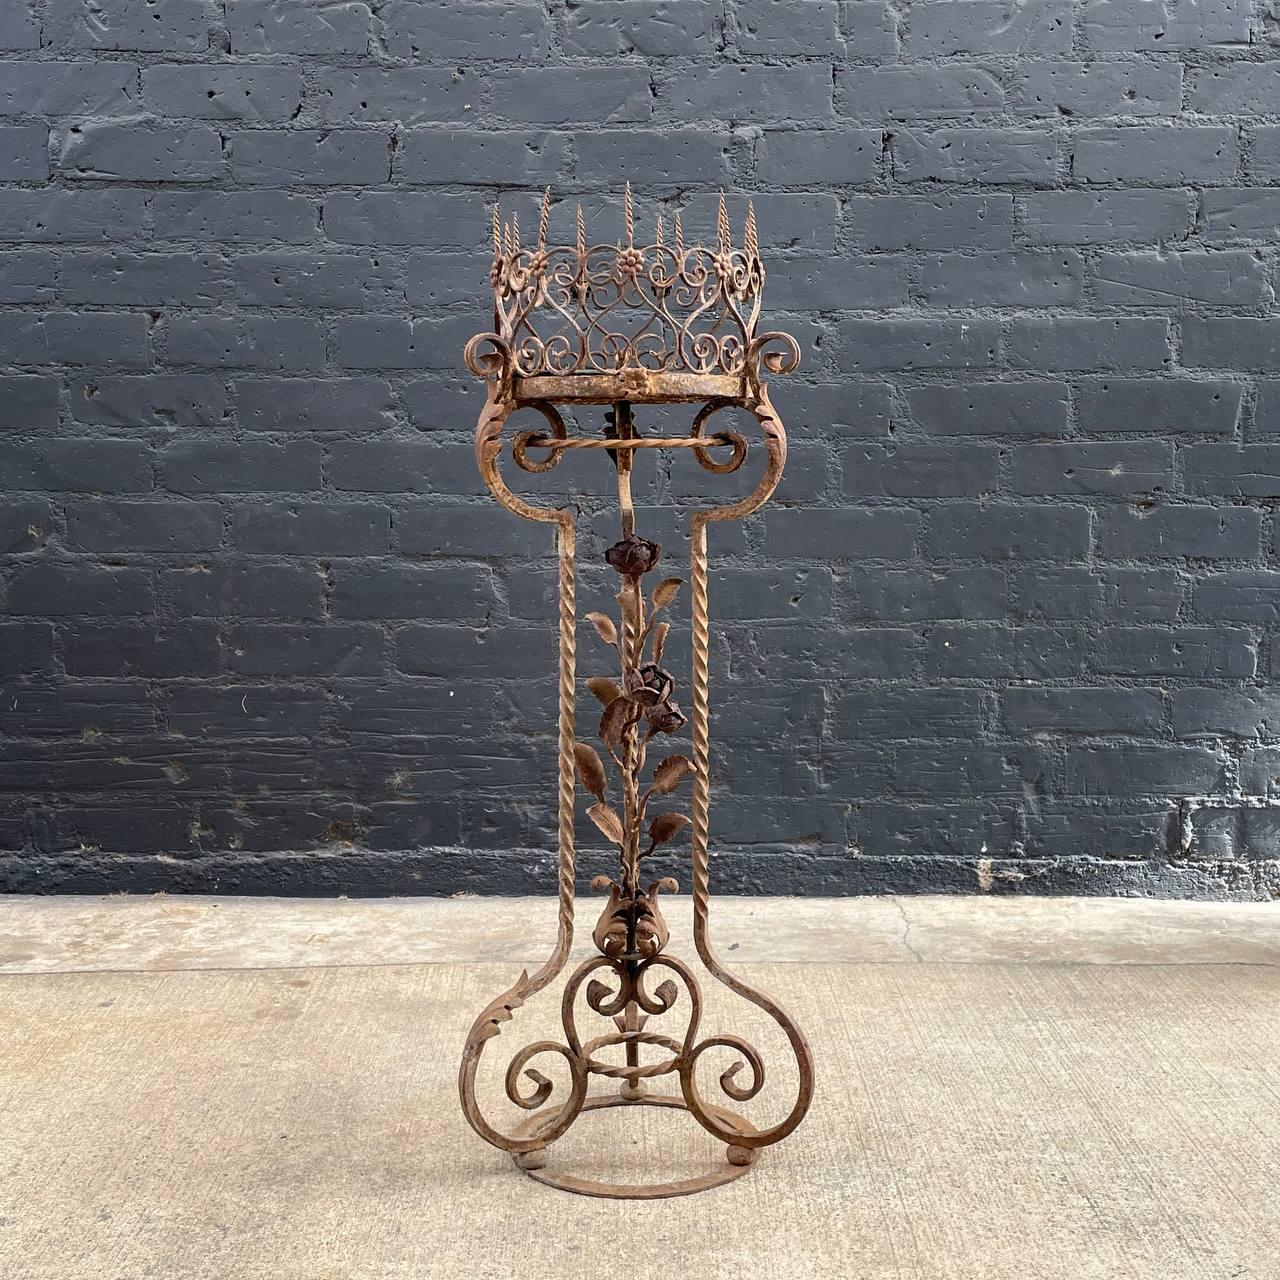 Italian Baroque Style Wrought Iron & Gilt Metal Plant Stand

Country: Italy 
Materials: Iron
Condition: Original Condition
Style: Italian Baroque
Year: 1920s

$950

Dimensions:
40”H x 14.50”W x 14.50”D